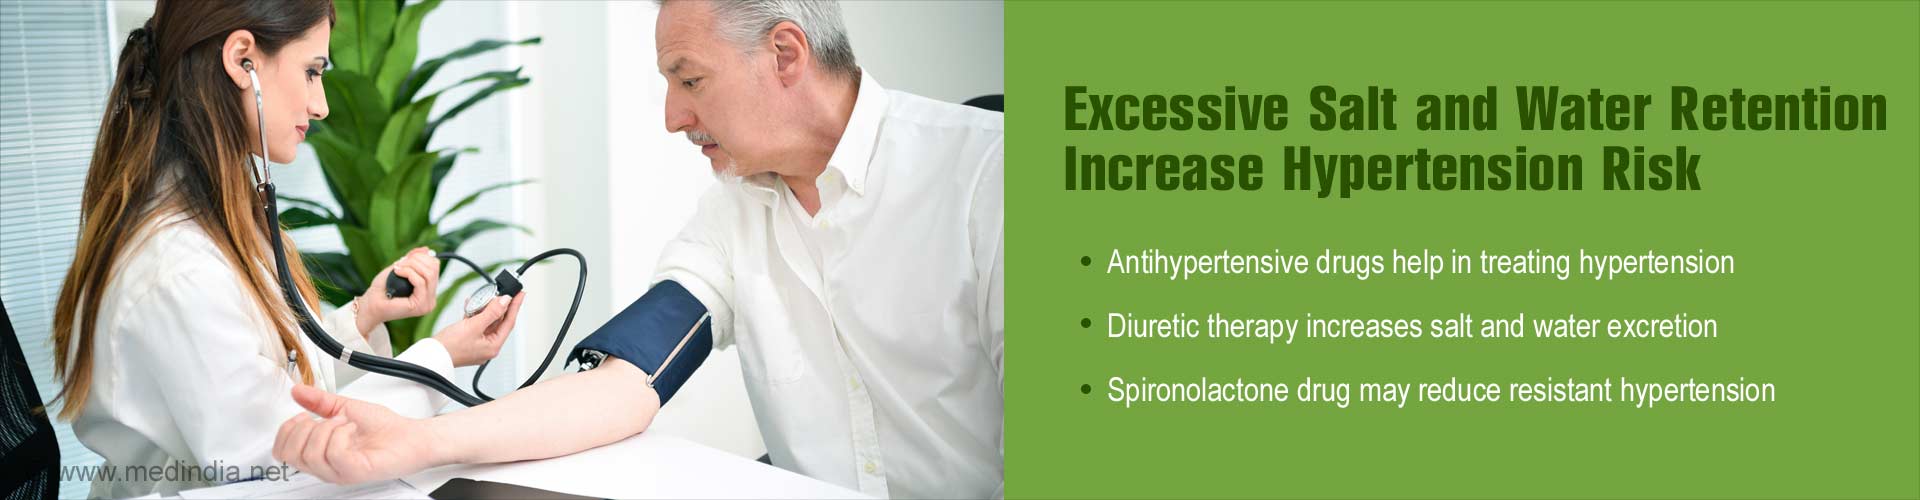 excessive salt and water retention increase hypertension risk
- antihypertensive drugs help in treating hypertension
- diuretic therapy increases salt and water excretion
- spironolactone drug may reduce resistant hypertension
